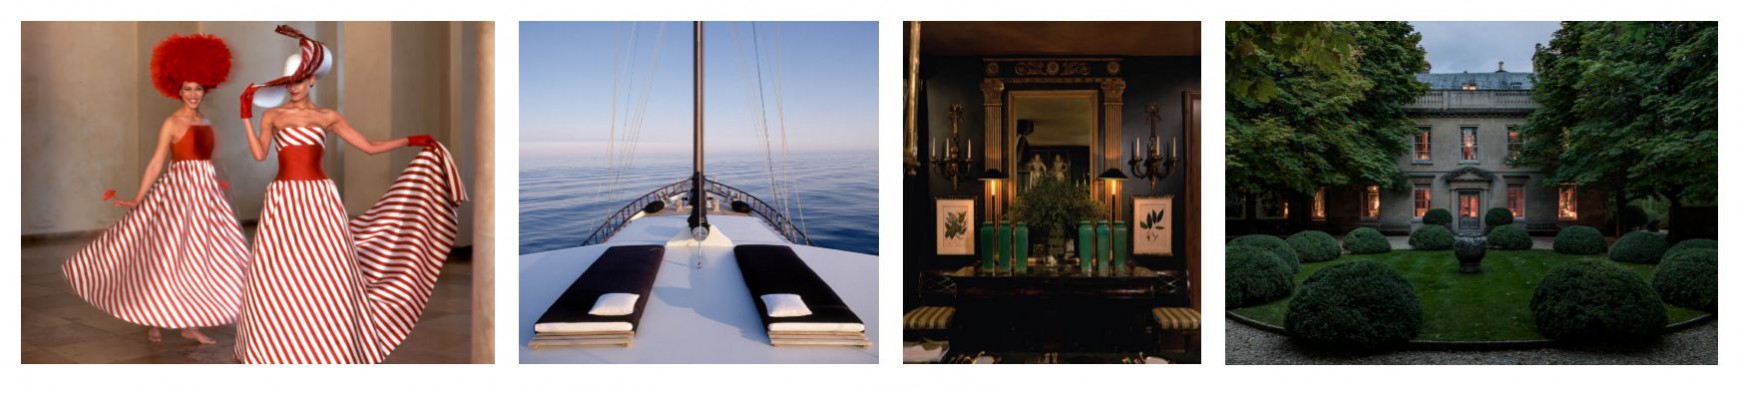 Cross-disciplinary Design example, Anouska Hempel; Images (left-right) Couture collection Beluga, yacht design Wiltshire, interior design Wiltshire, Garden design Accessed: 14/08/15 www.anouskahempeldesign.com 